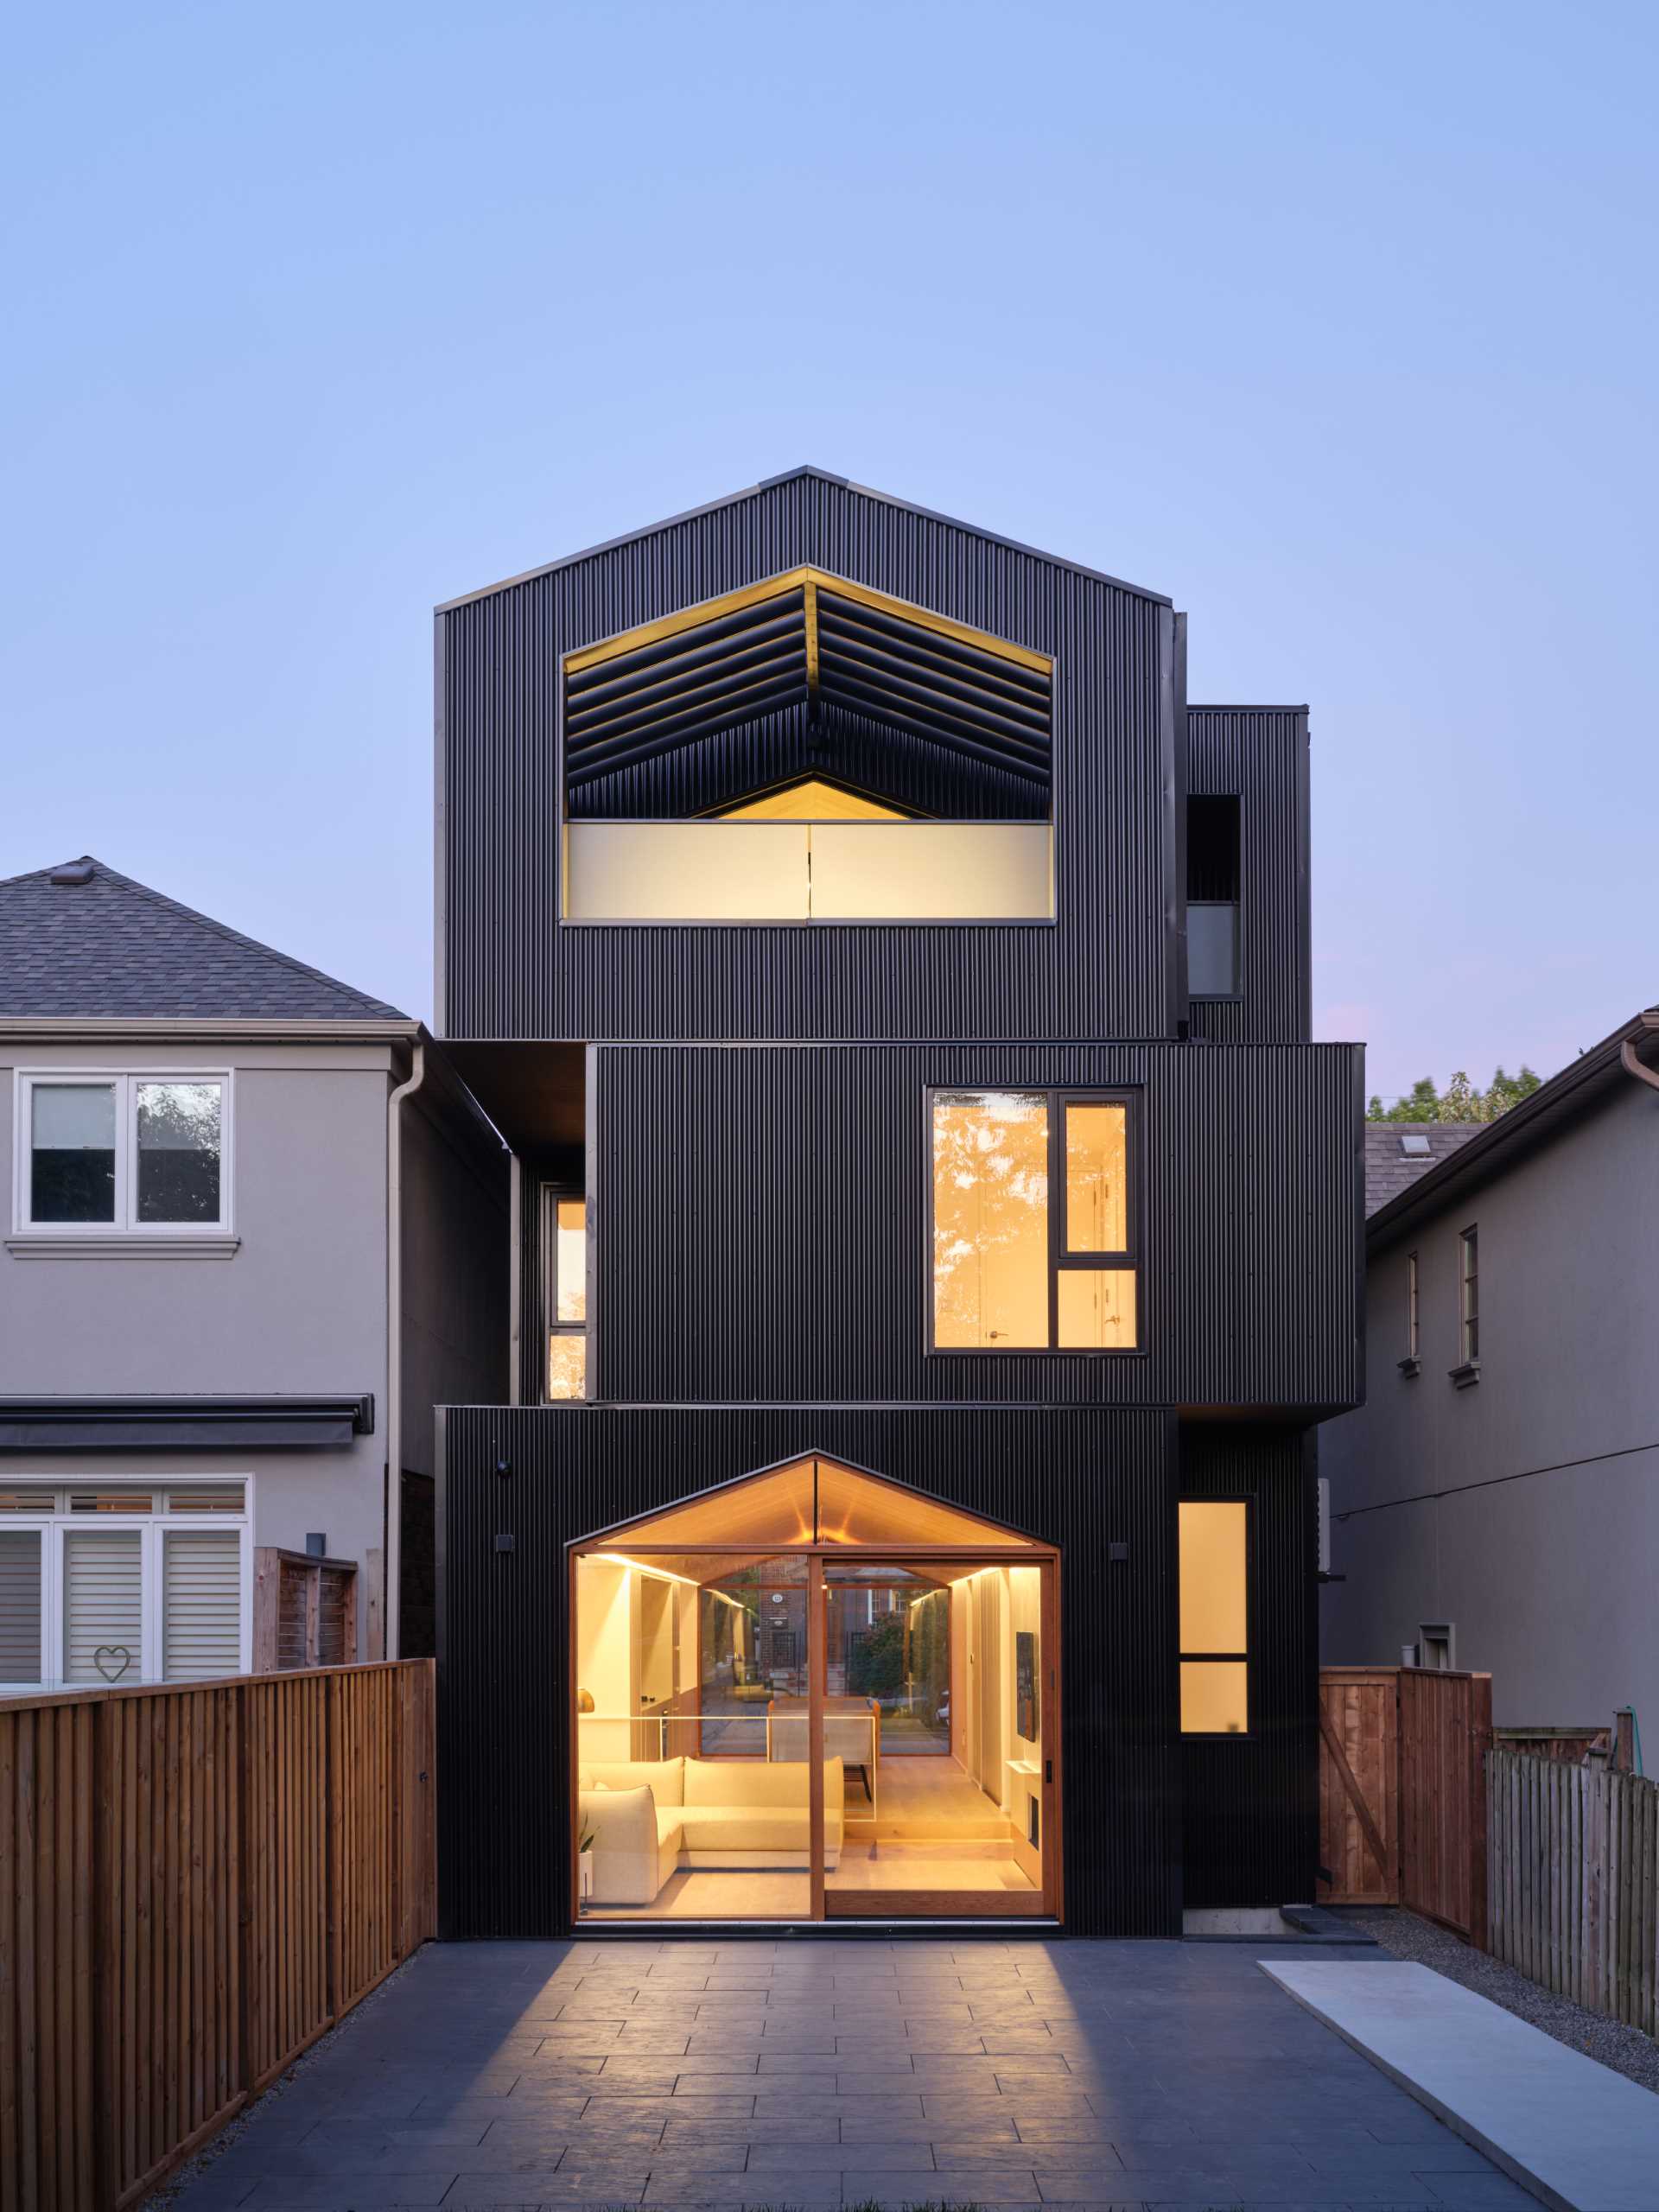 The home has a gable roof and appears as a series of stacked black boxes, with different levels defining the various areas of the home.